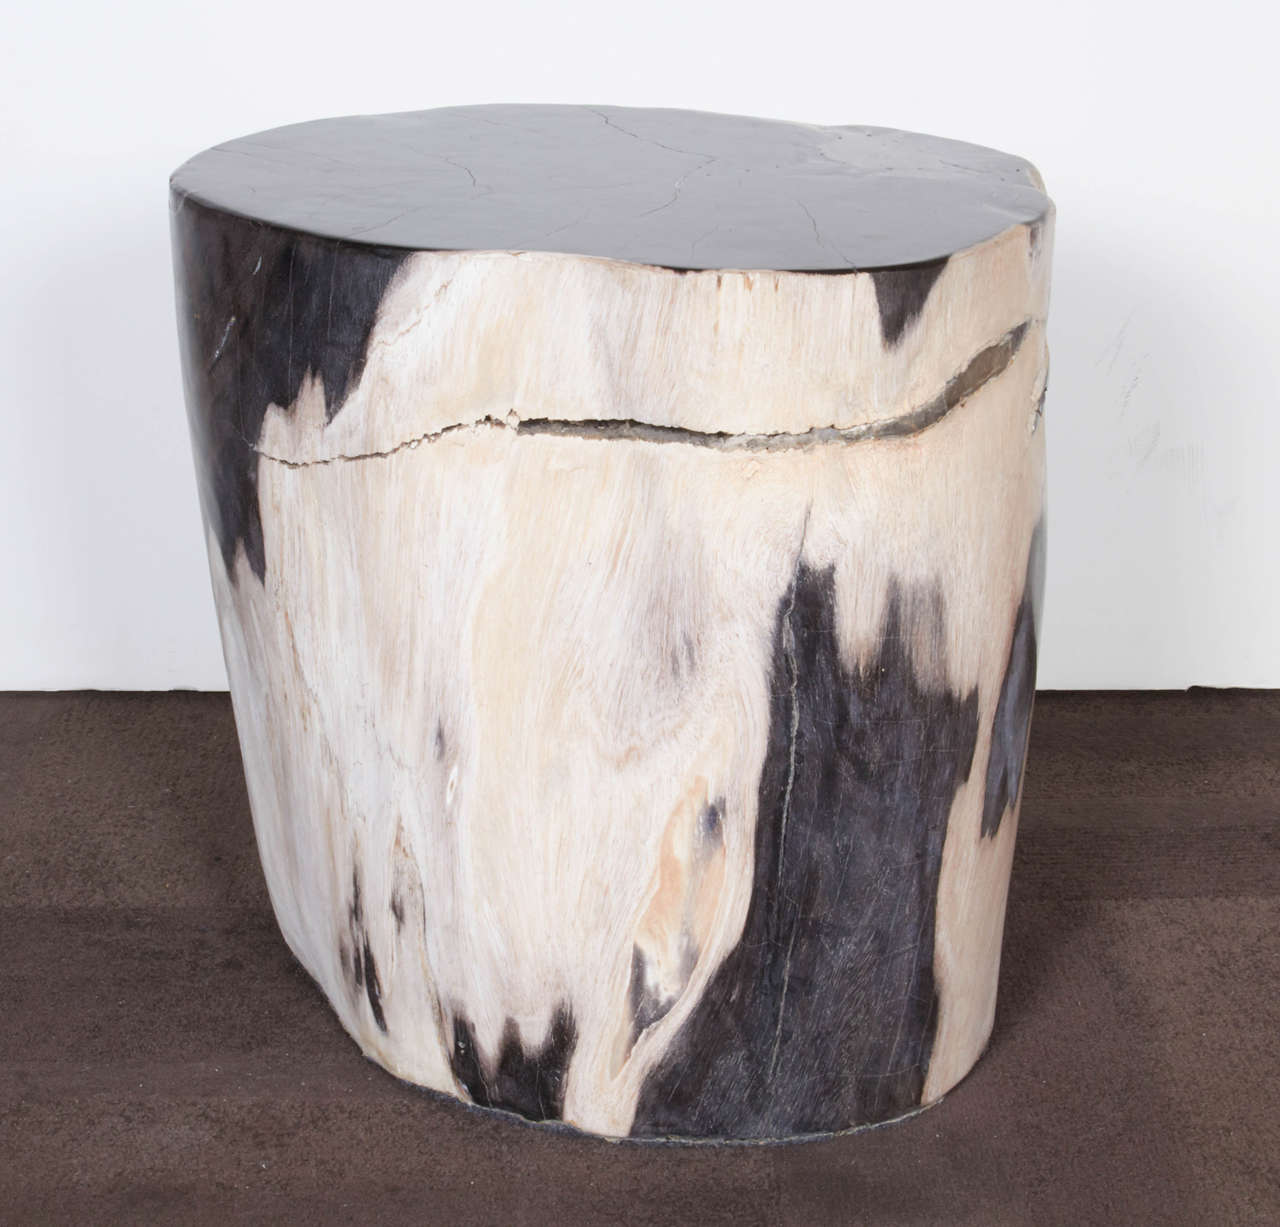 Exceptional petrified wood side table. Naturally fossilized throughout hundreds of years. Outstanding quality that has been hand cut and polished. The table can double as a stool or seating. The organic streaking and tones throughout is a remarkable